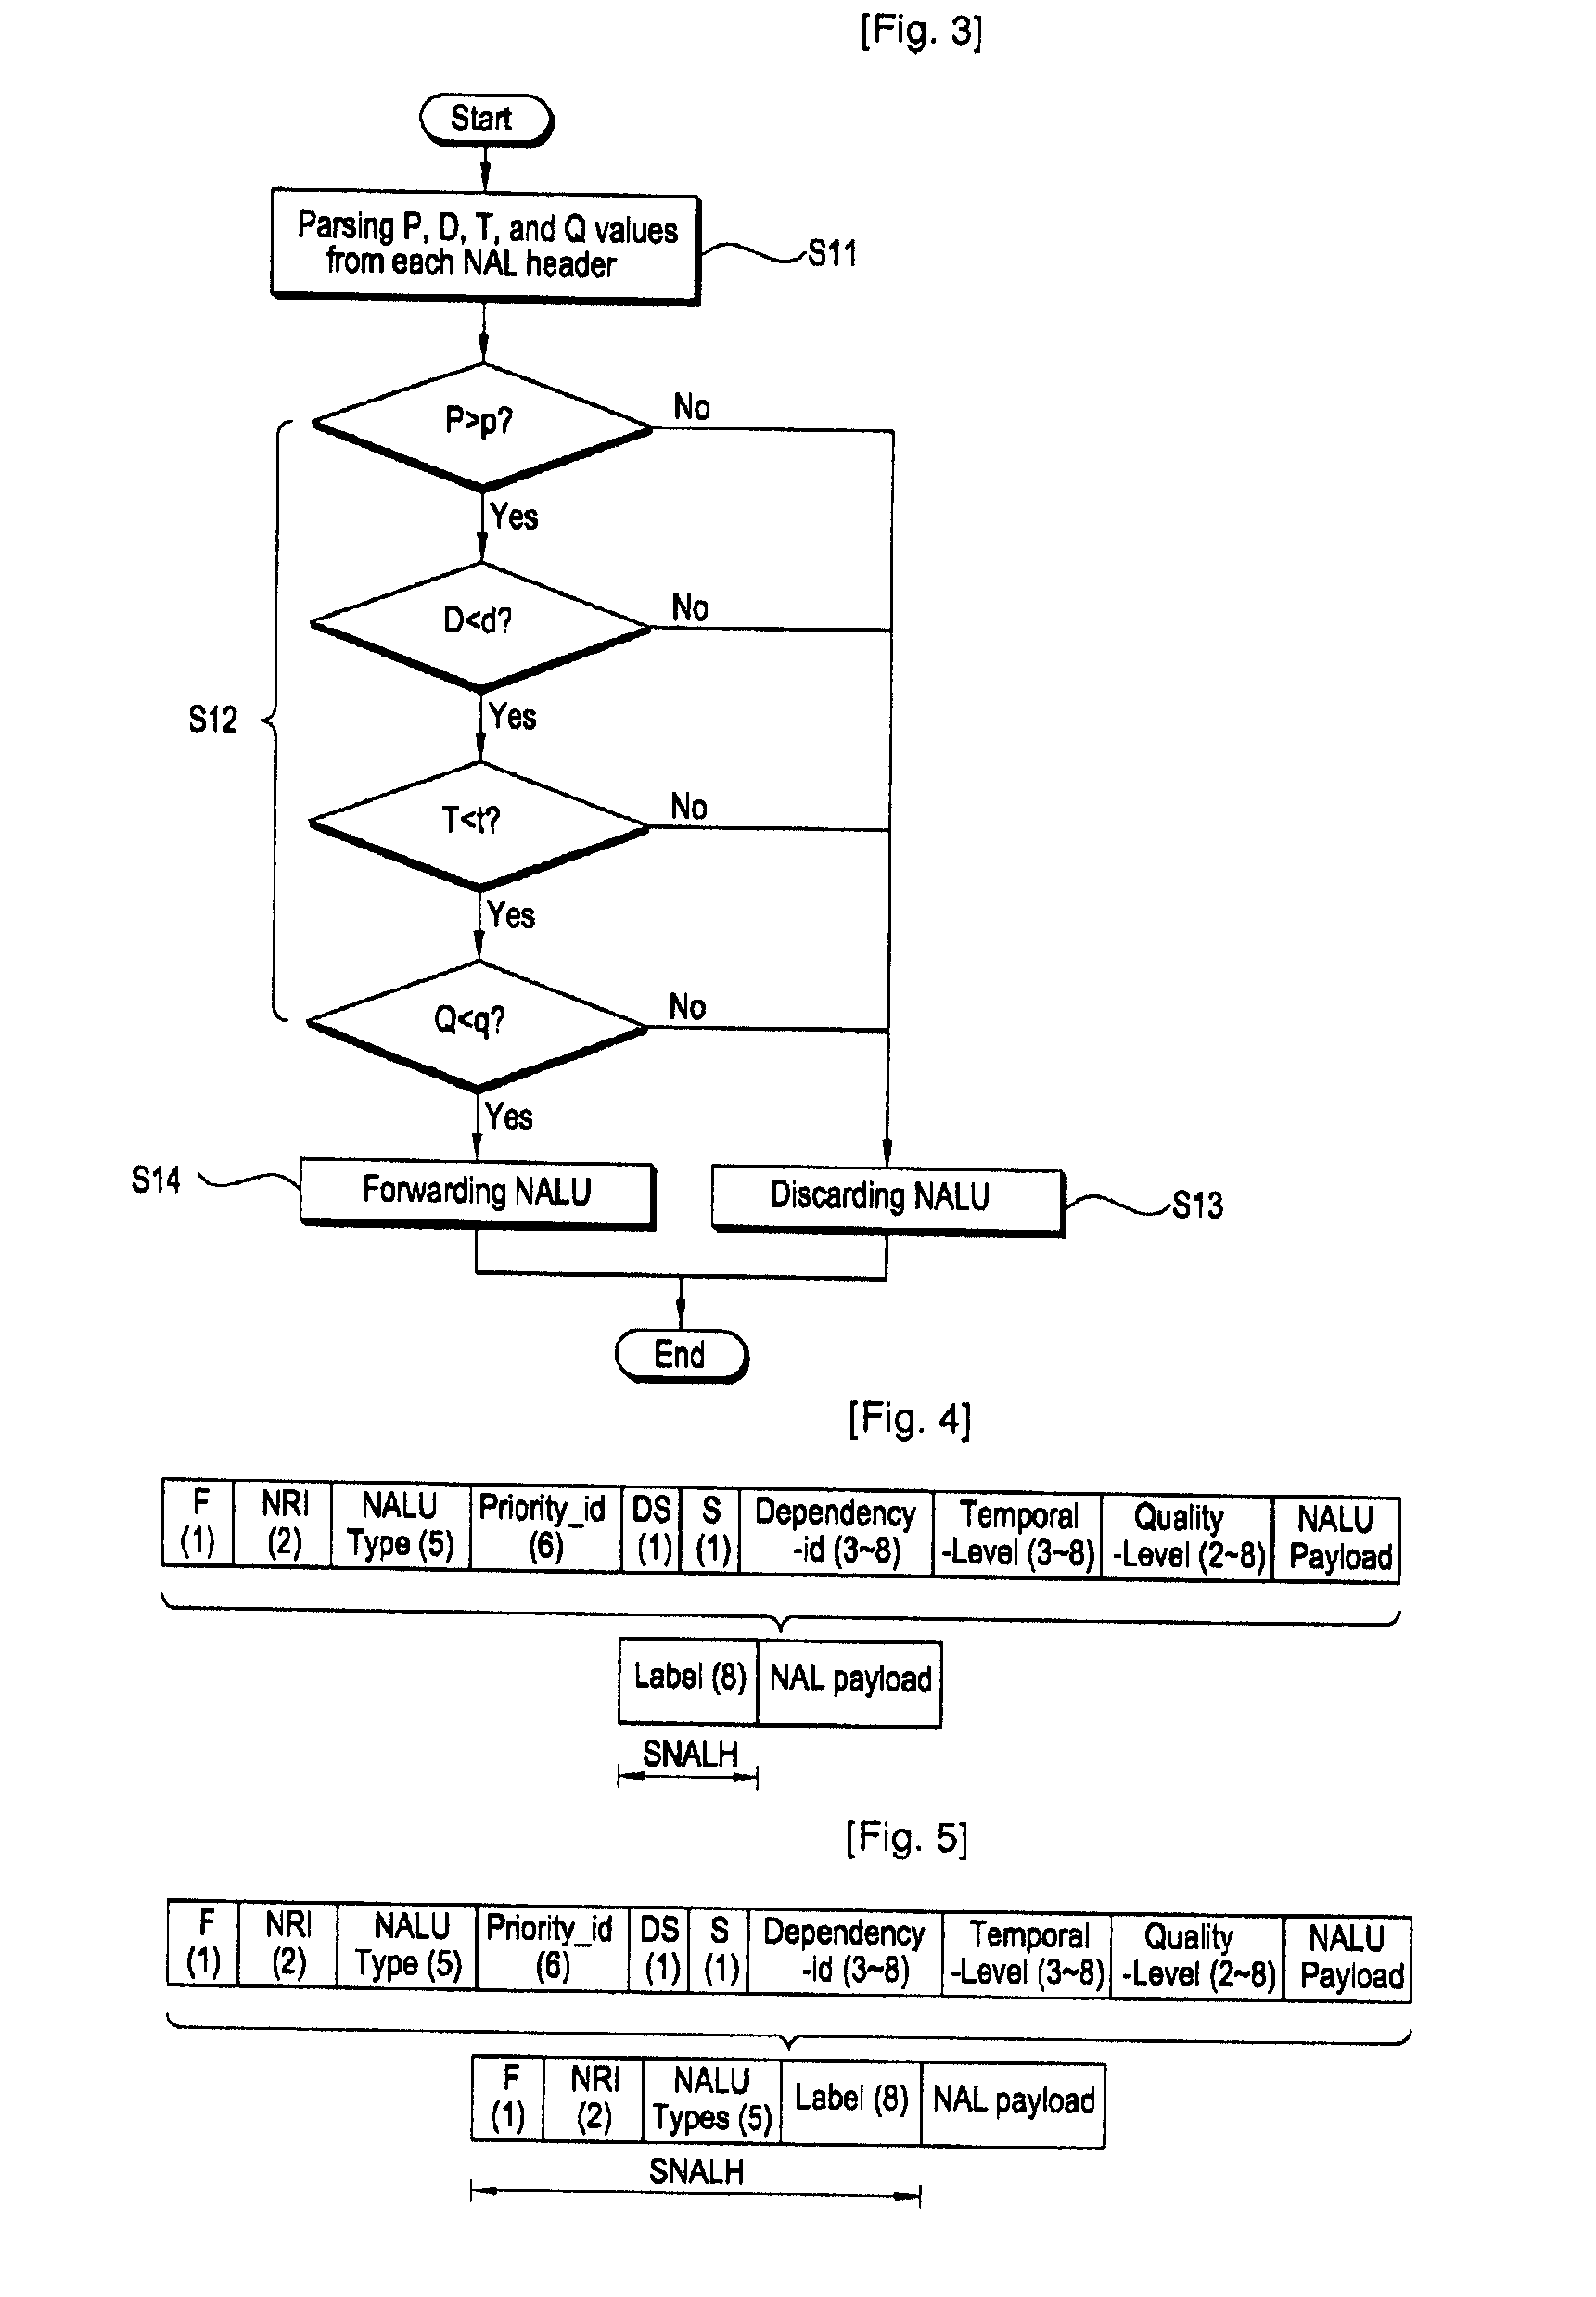 Packet format of network abstraction layer unit, and algorithm and apparatus for video encoding and decoding using the format, QOS control algorithm and apparatus for ipv6 label switching using the format